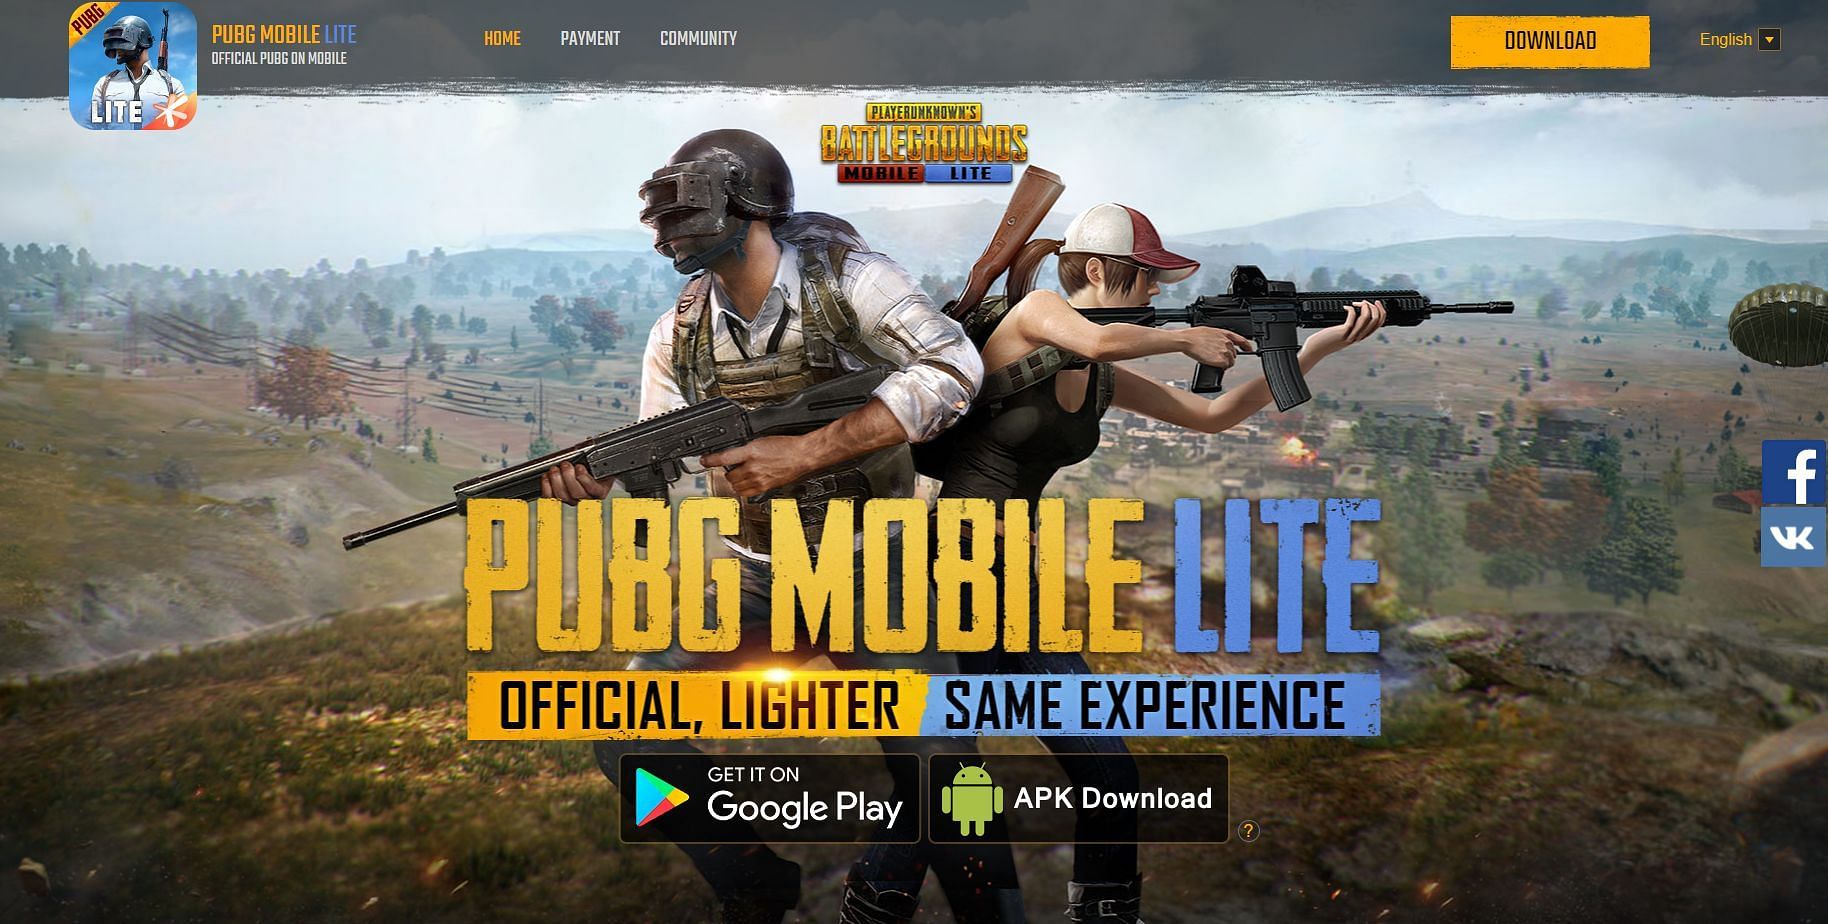 Click on the "APK Download" button on the game's website (Image via Tencent)